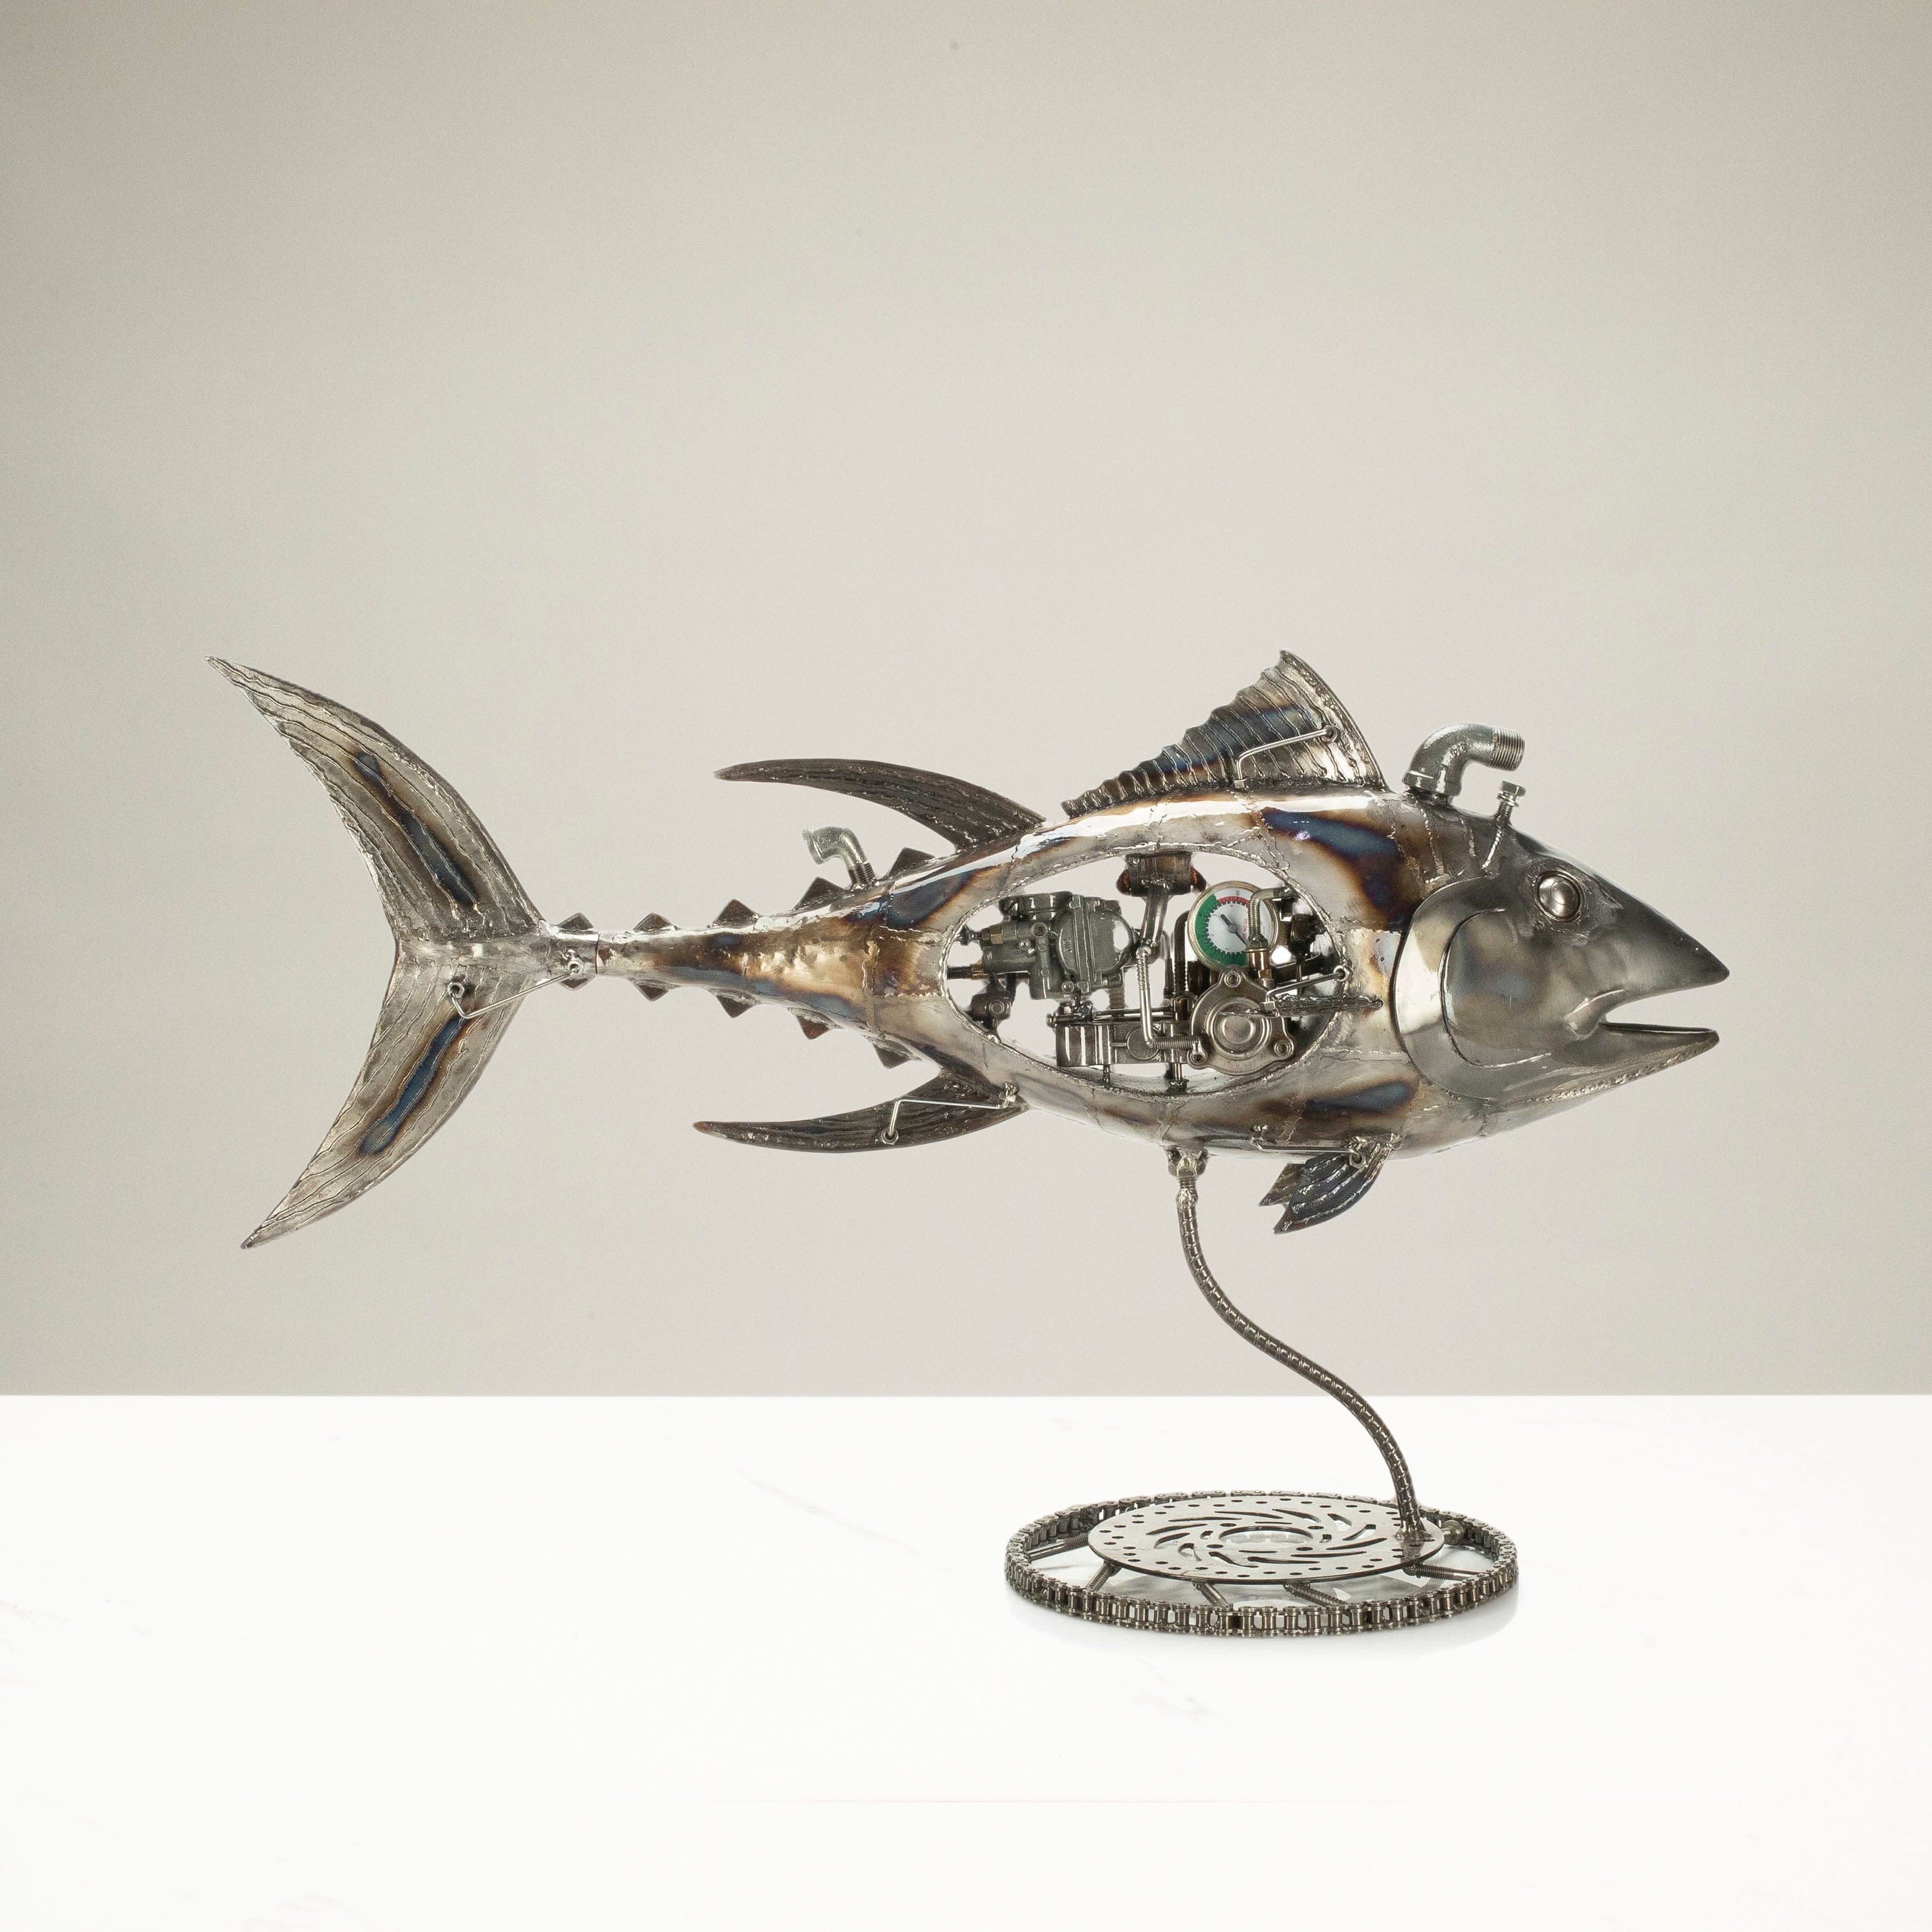 KALIFANO Recycled Metal Art 39" Tuna Fish Inspired Recycled Metal Art Sculpture RMS-T99x55-PK